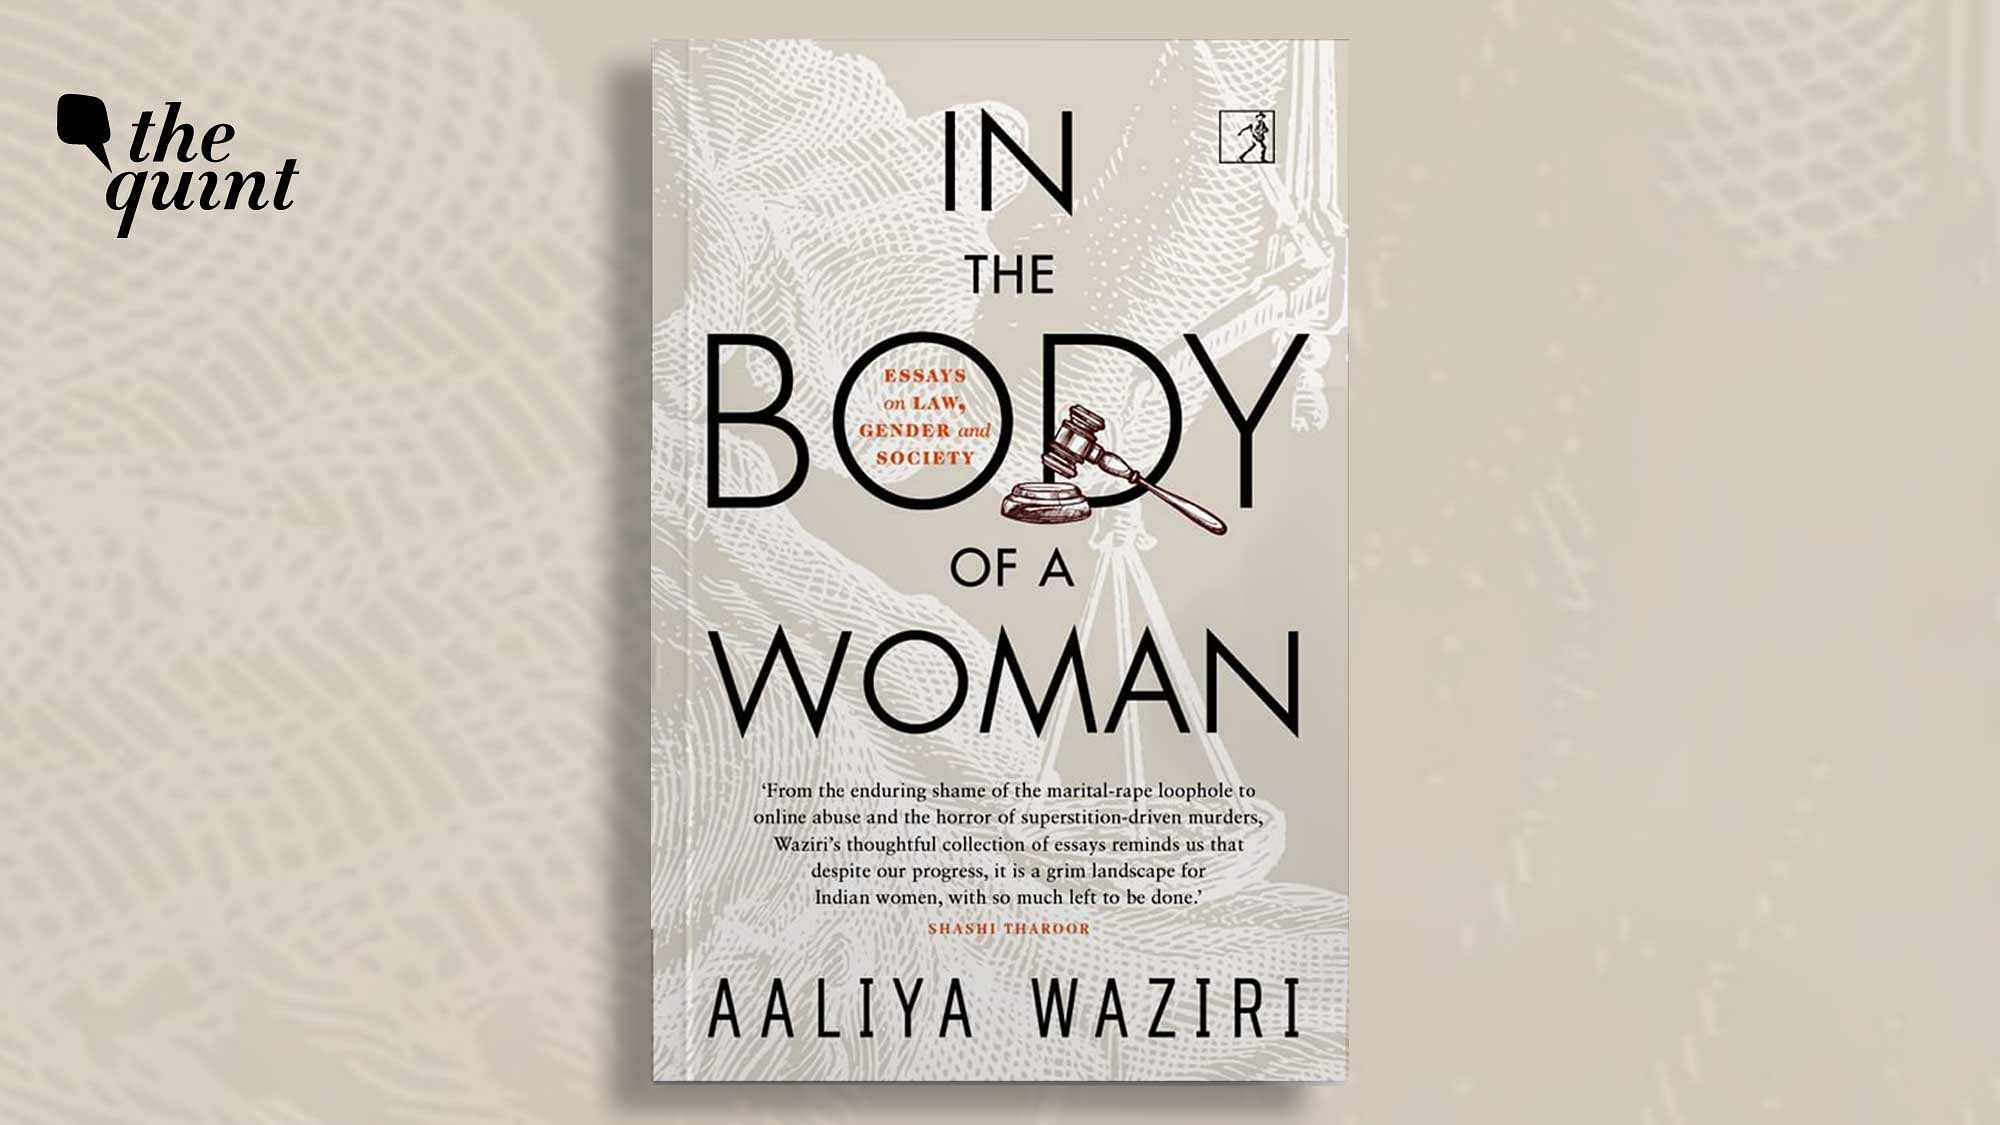 <div class="paragraphs"><p>Cover of&nbsp;<em>In the Body of a Woman: Essays on Law, Gender and Society.</em></p></div>